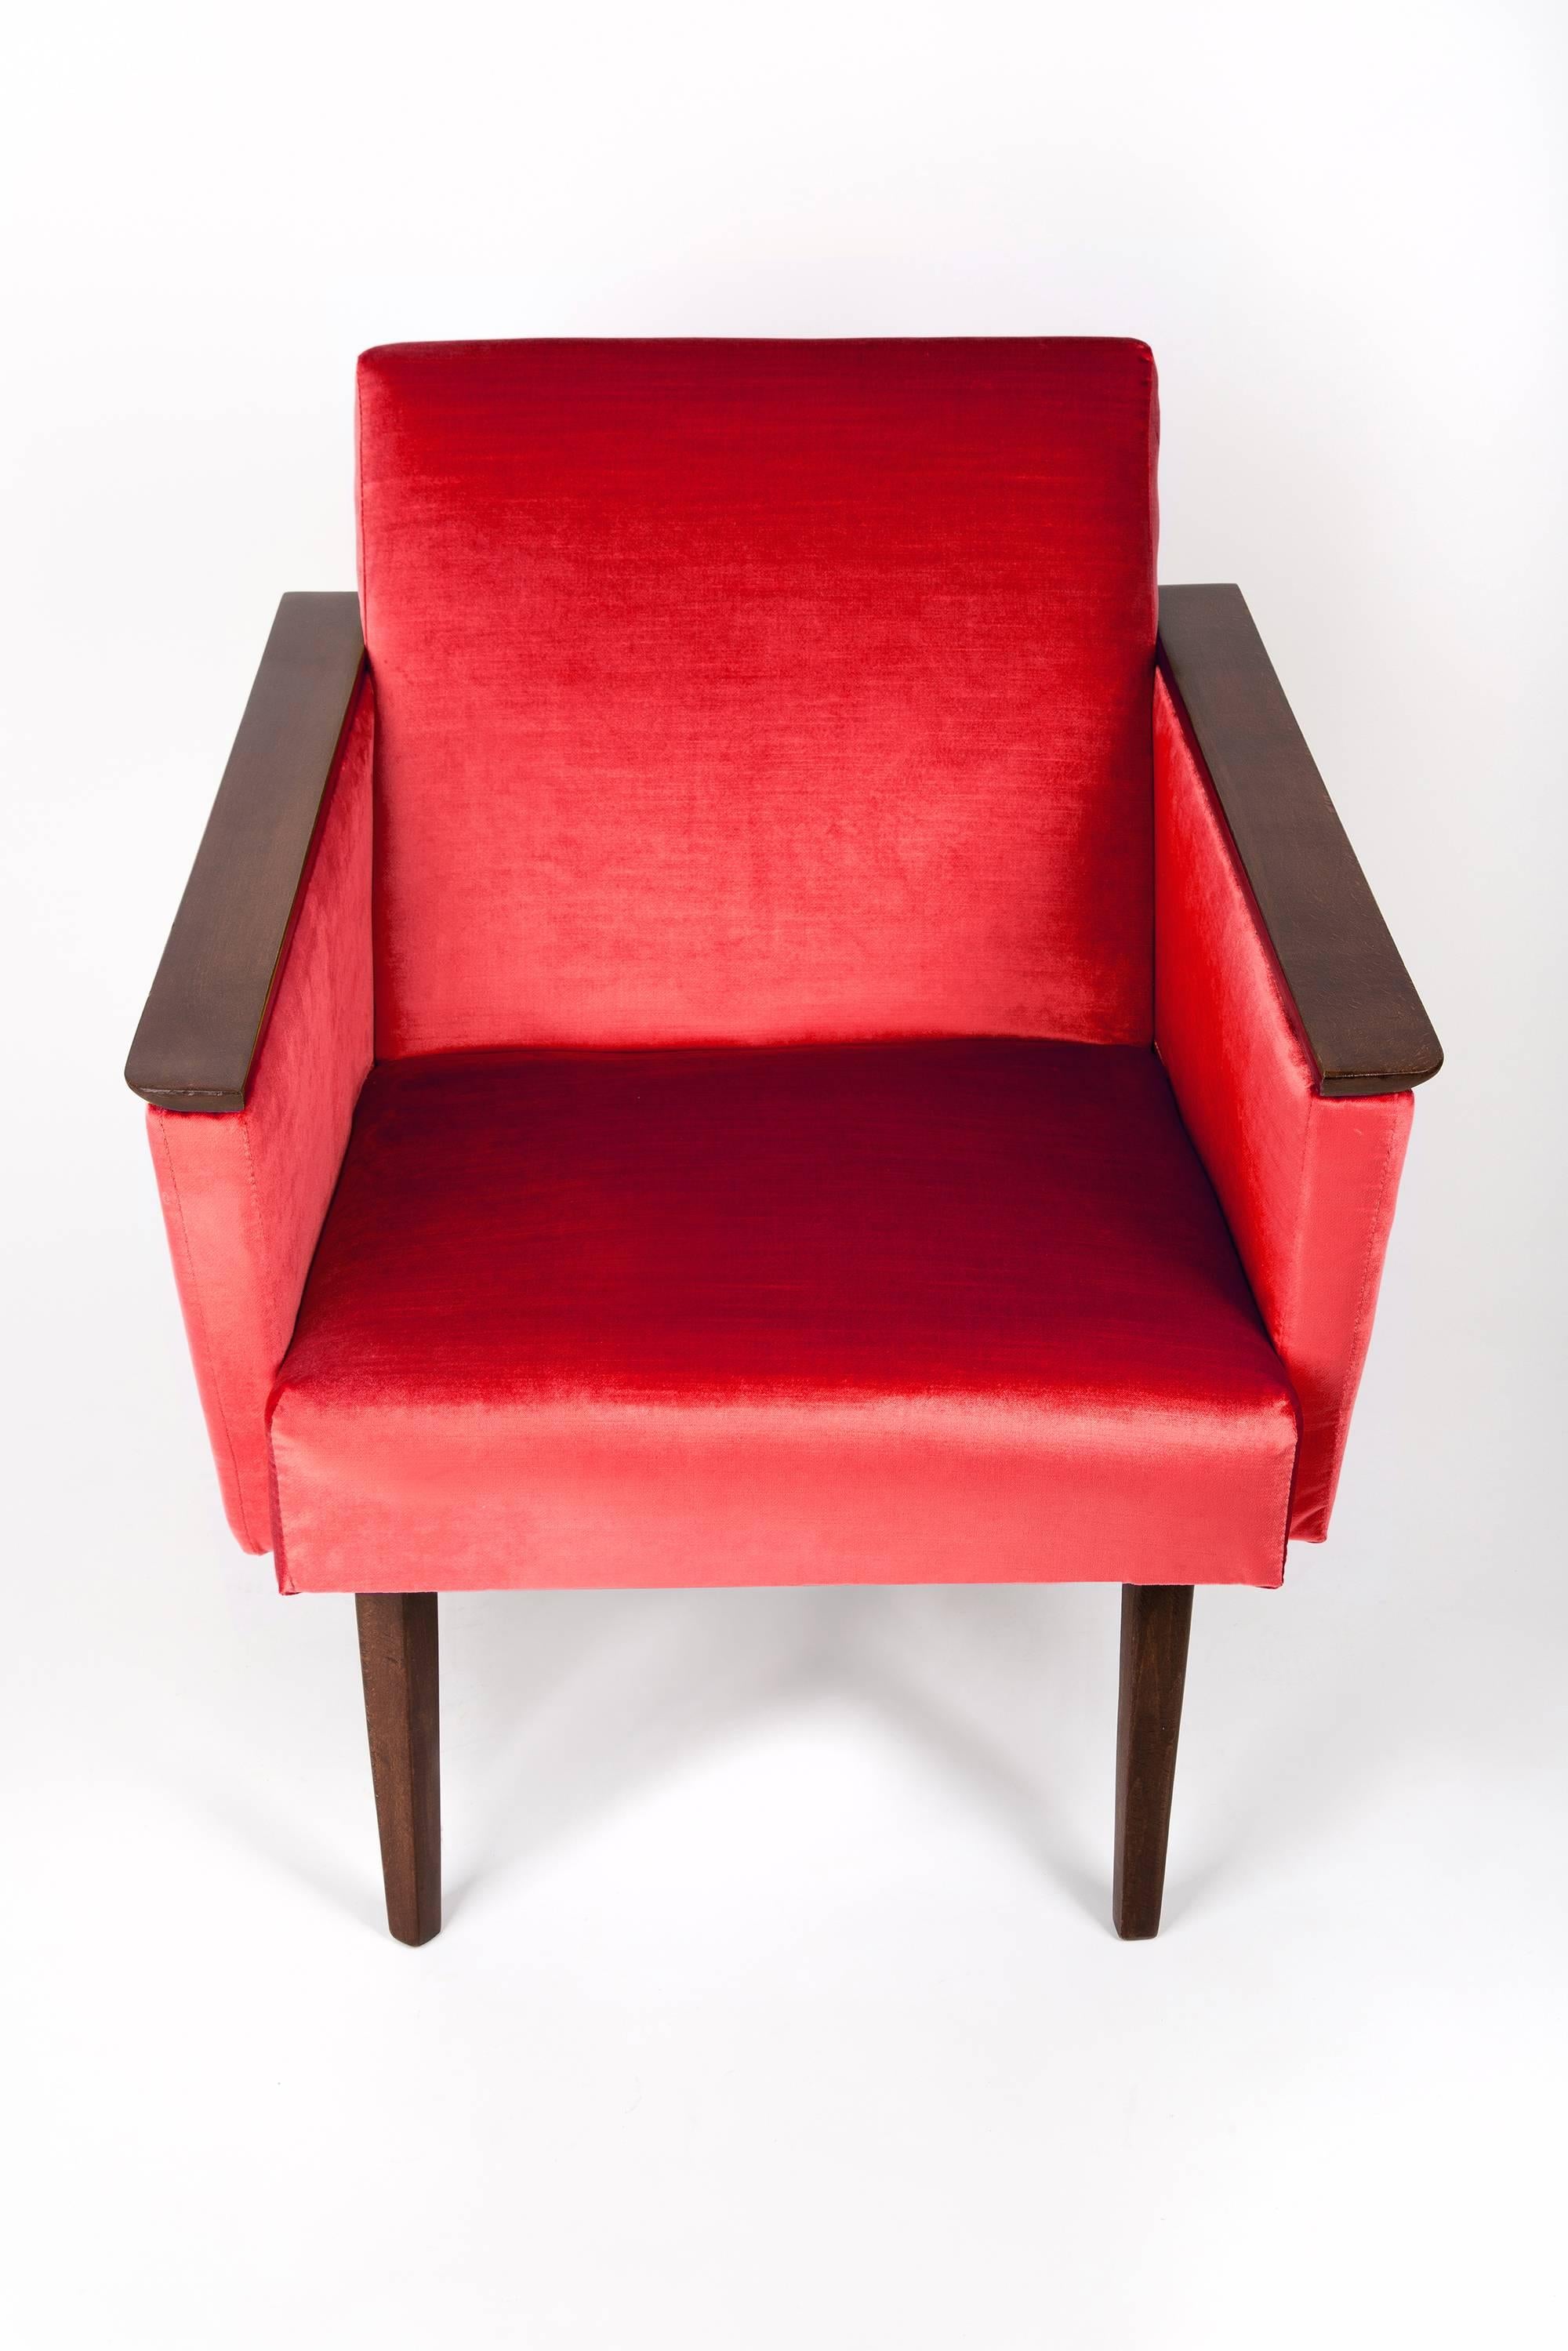 20th Century Pair of Red Armchairs, 1960s, DDR, Germany For Sale